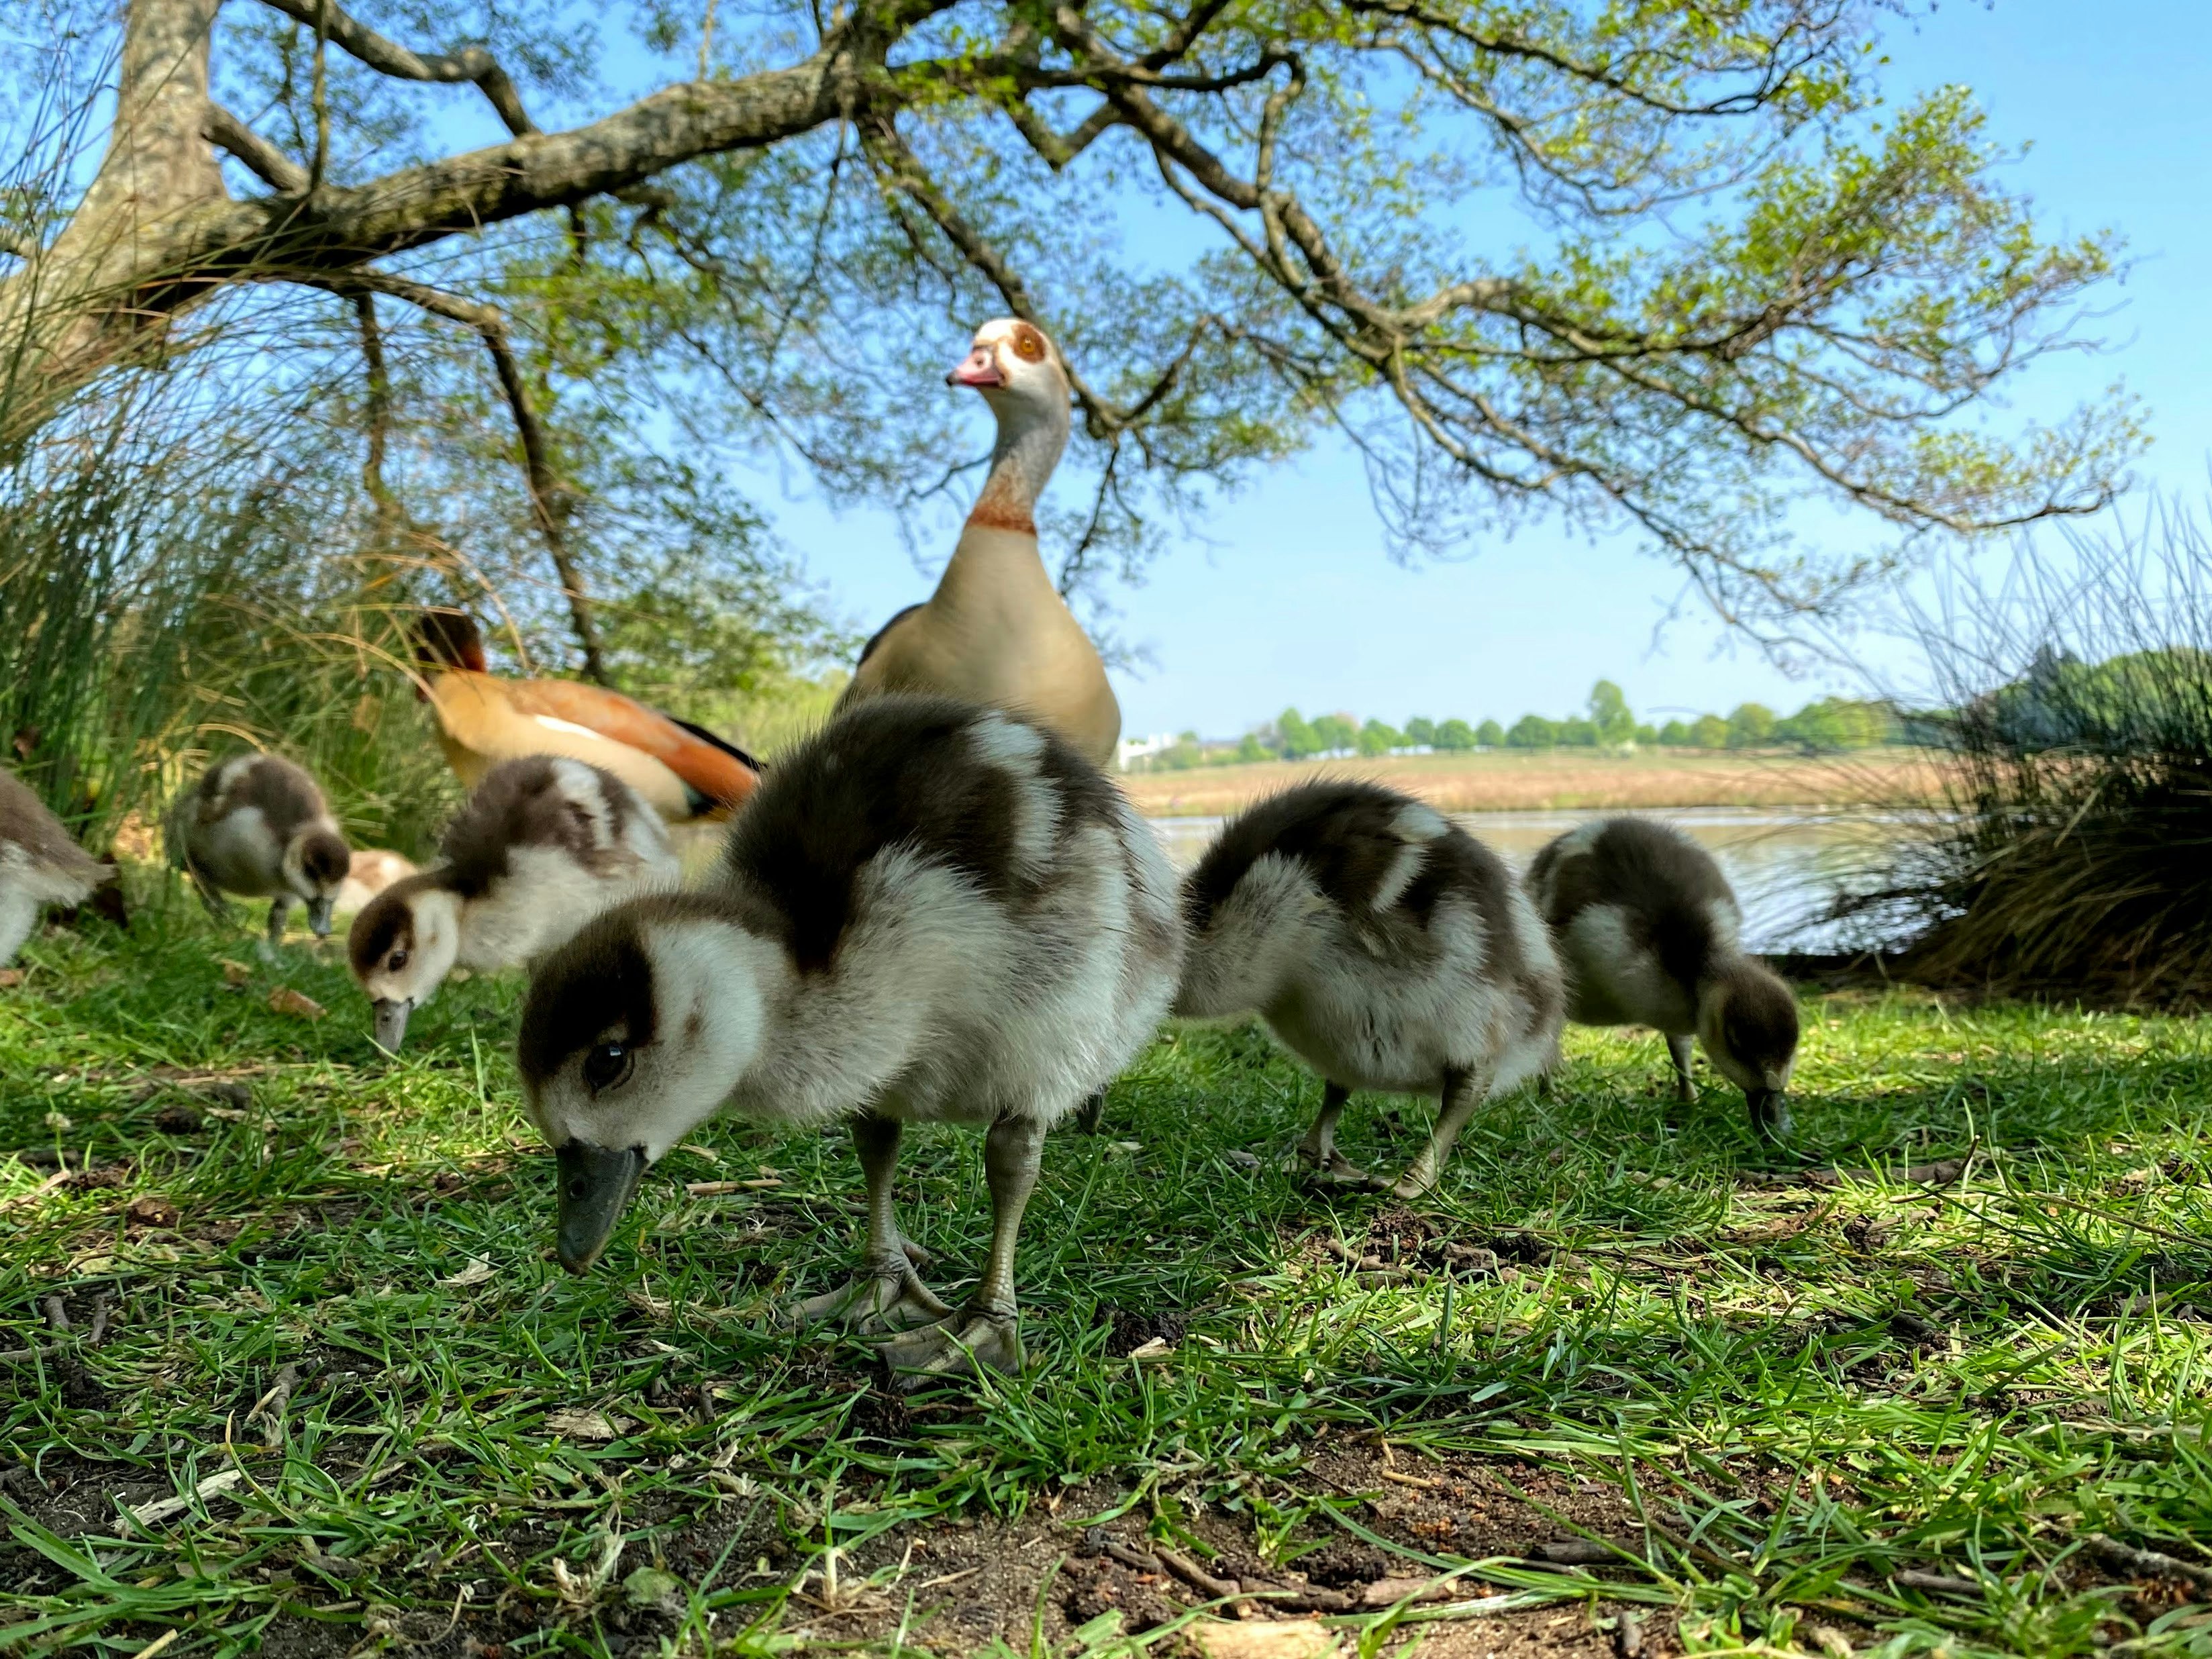 flock of geese on green grass field during daytime